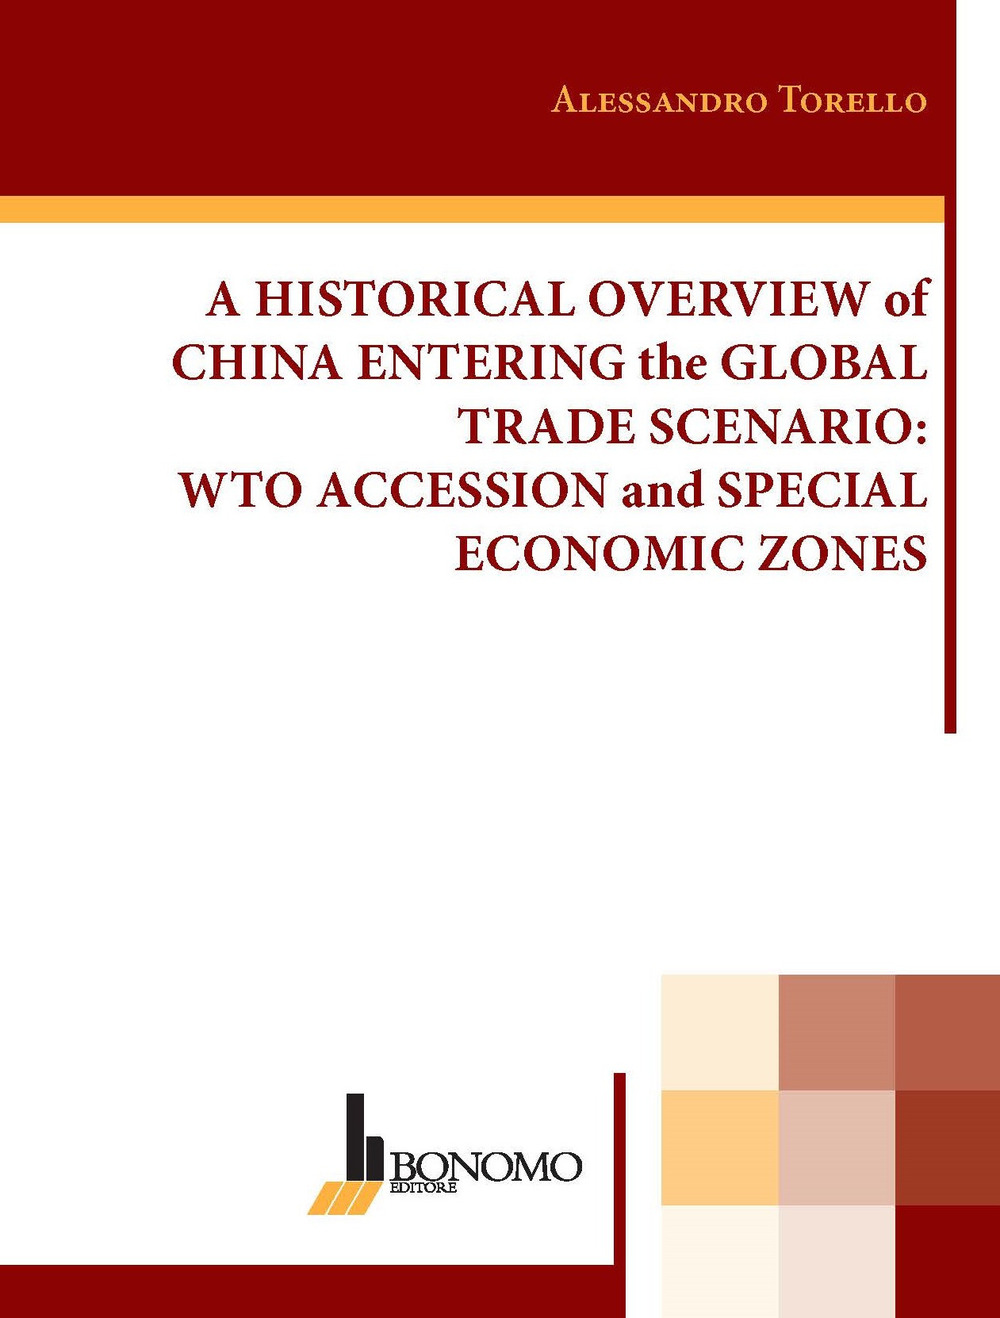 A historical overview of China entering the global trade scenario. Wto accession and special economic zones